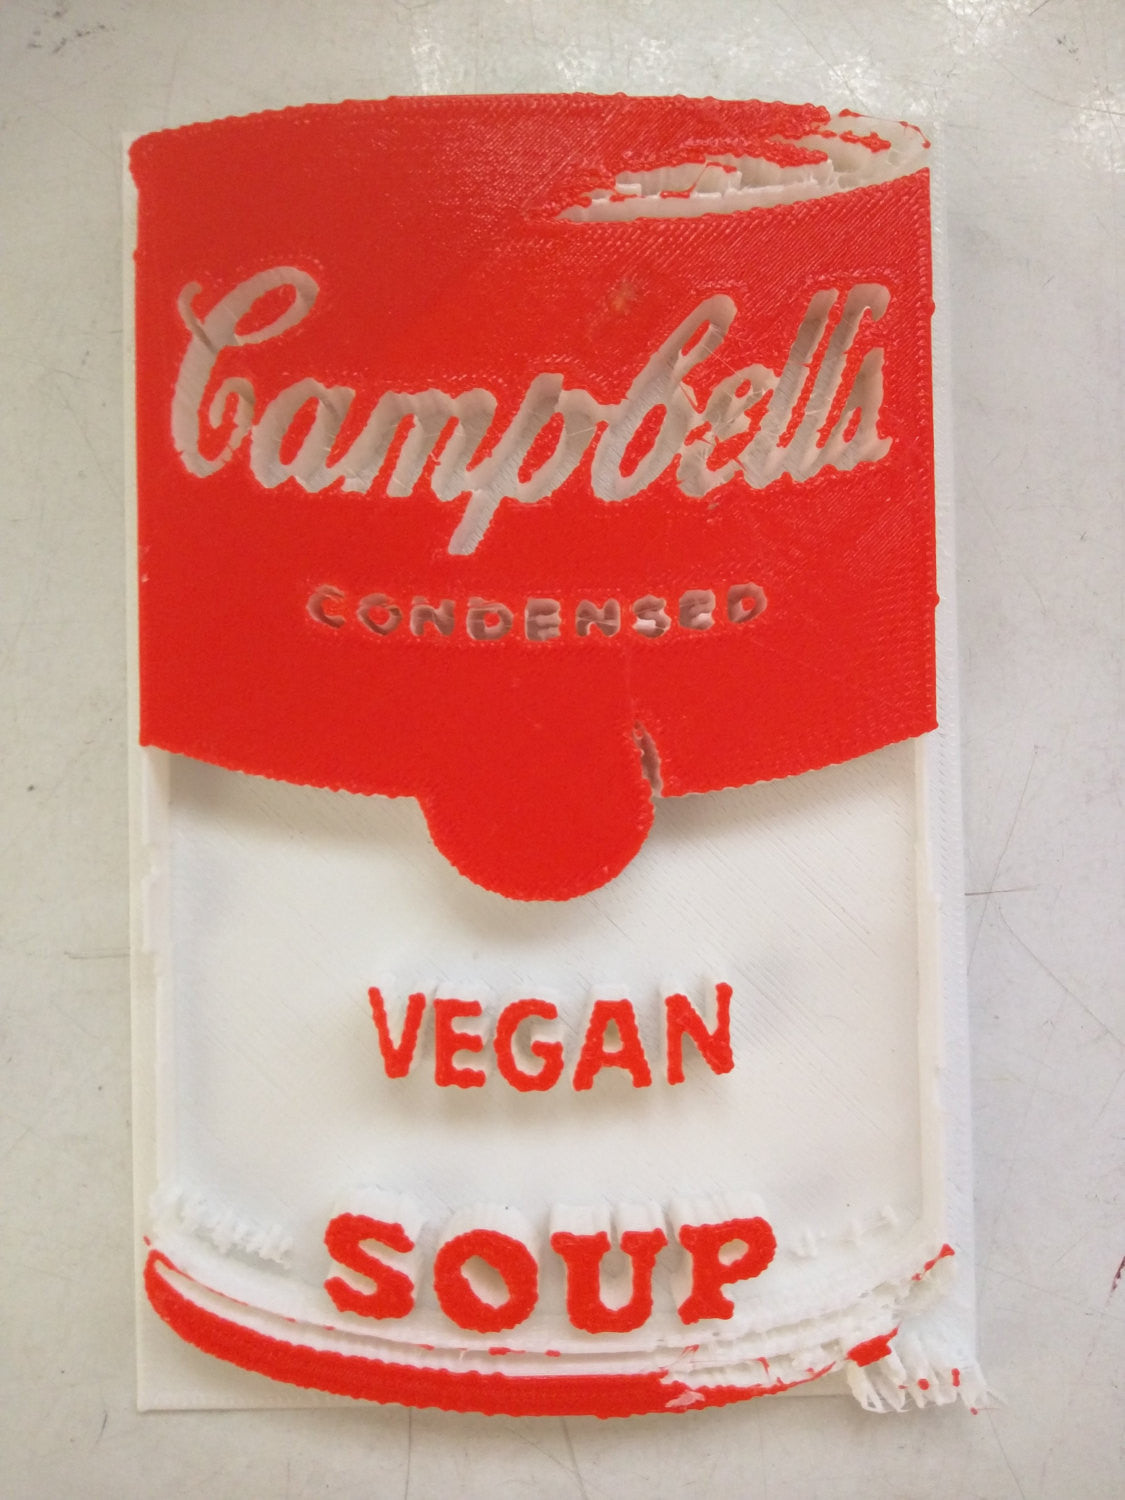 3D printed Campbell's Vegan Soup Red & White by L3f0u